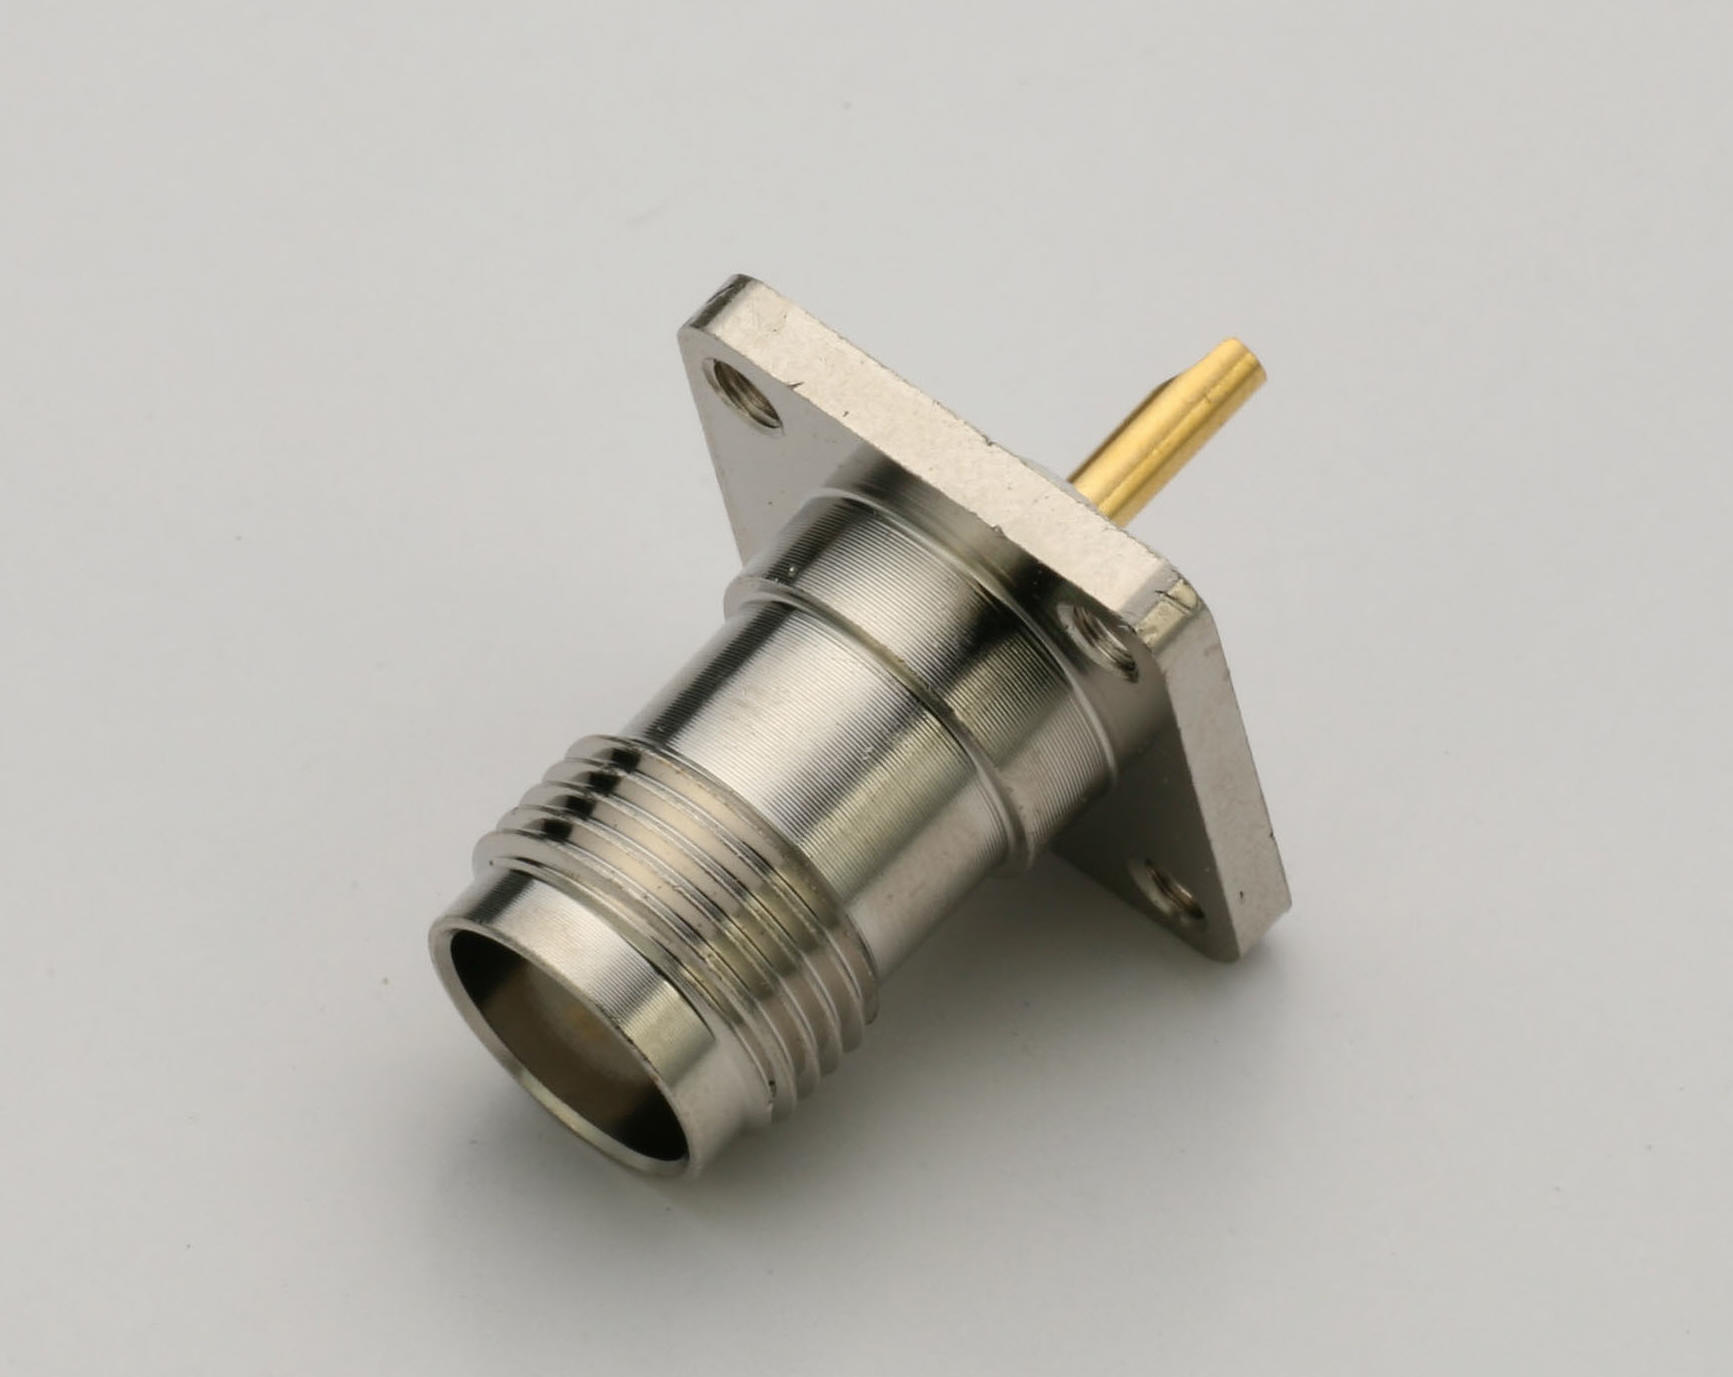 TNC Receptacle Jack for 4 Mounting Holes